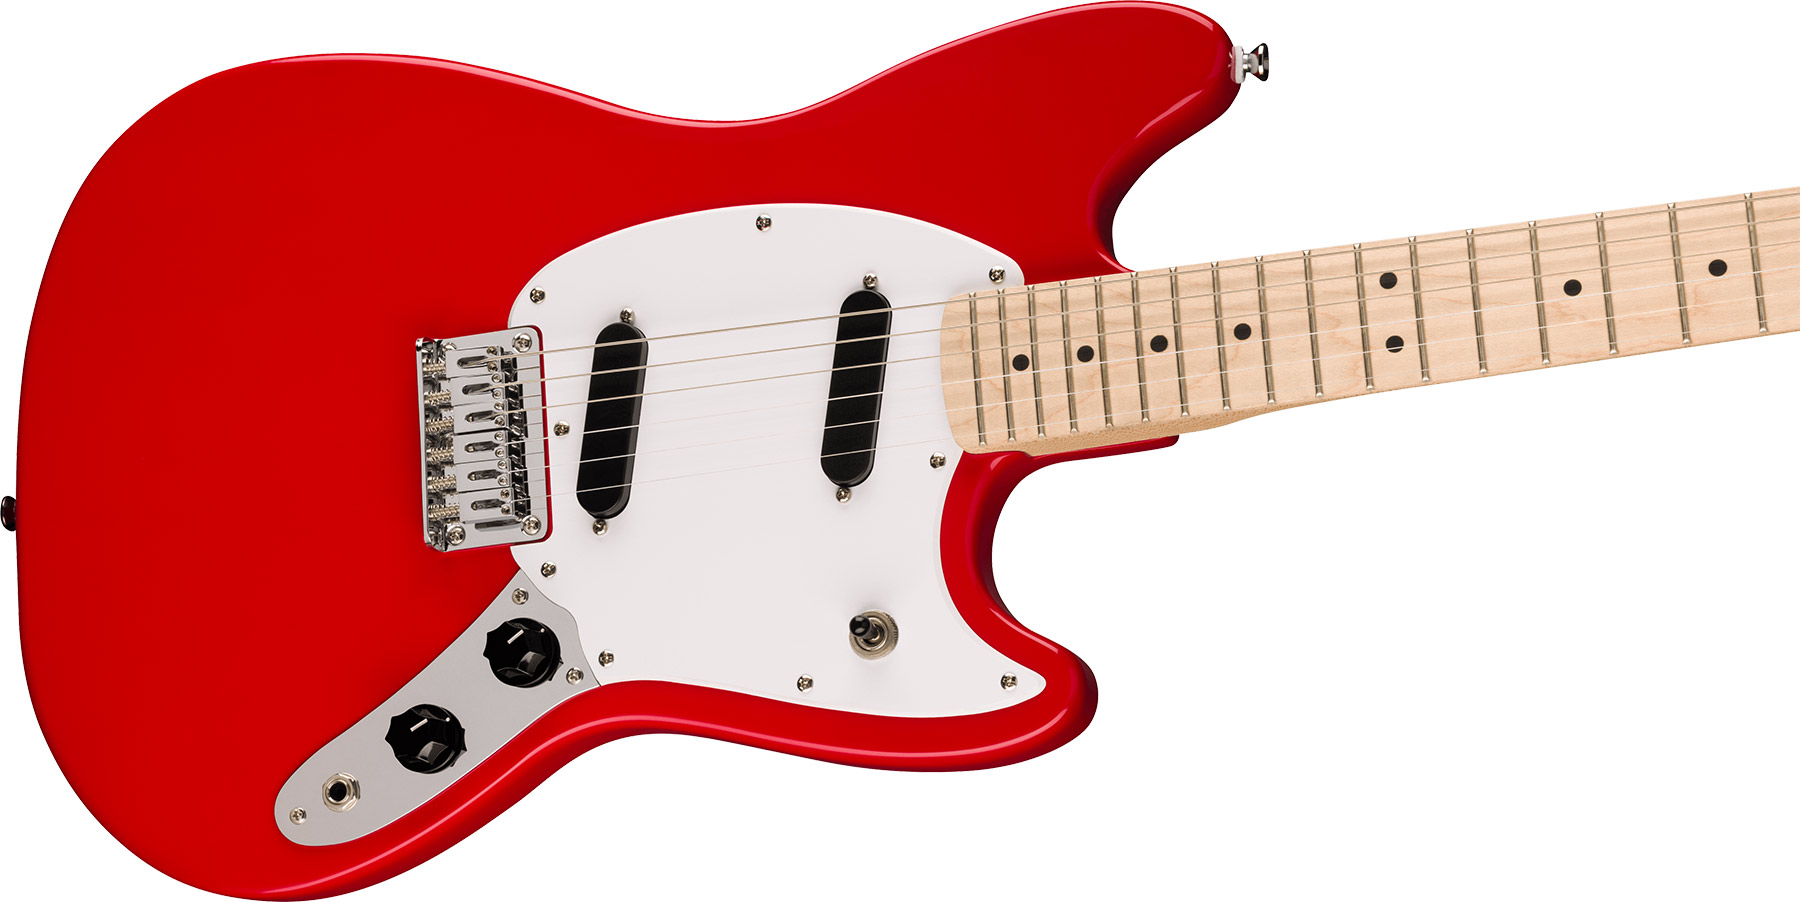 Squier Mustang Sonic 2s Ht Mn - Torino Red - Retro rock electric guitar - Variation 2